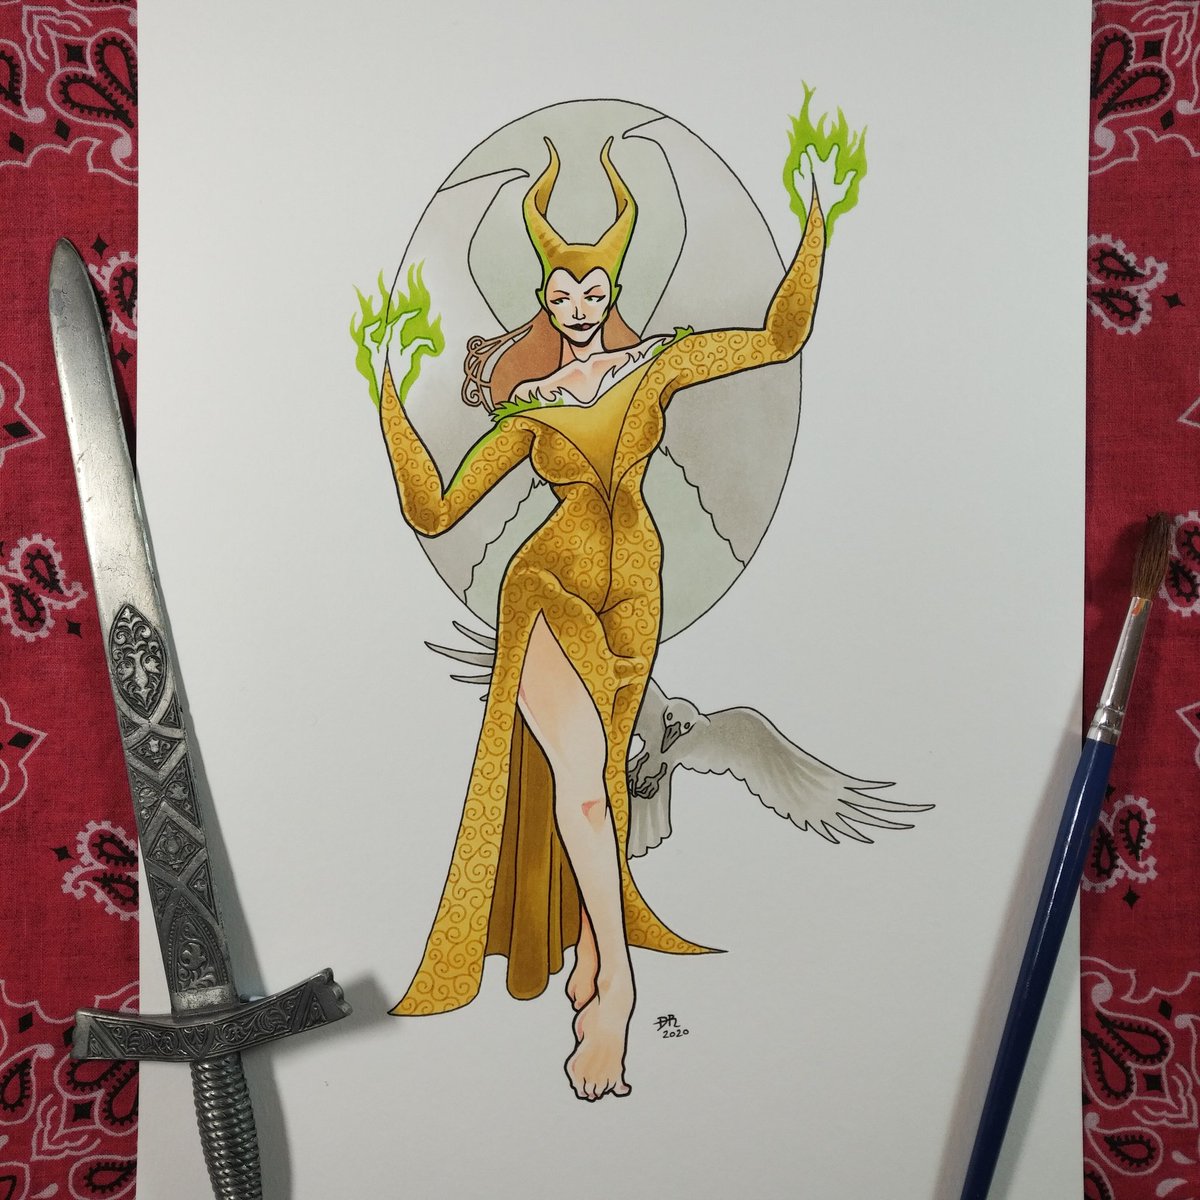 Here's a Maleficent design for you all today. #maleficent #maleficentmistressofevil #maleficentfanart #maleficentart @Maleficent #angelinajolie #sleepingbeauty #disney #fanart #aurora #tattoodesign #copic #copicmarkers #drawing #painting #illustration #drawingoftheday #art